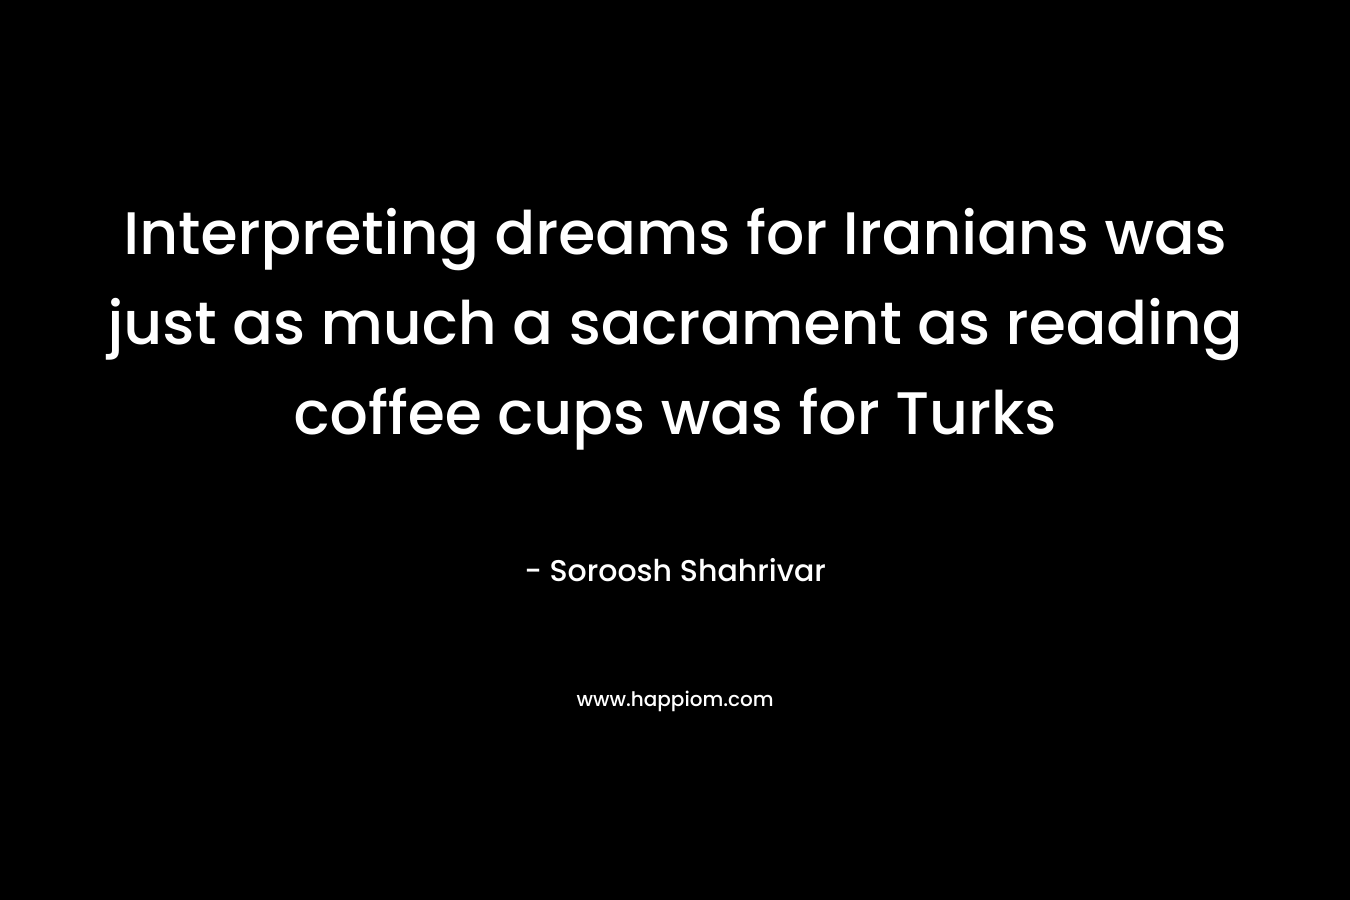 Interpreting dreams for Iranians was just as much a sacrament as reading coffee cups was for Turks